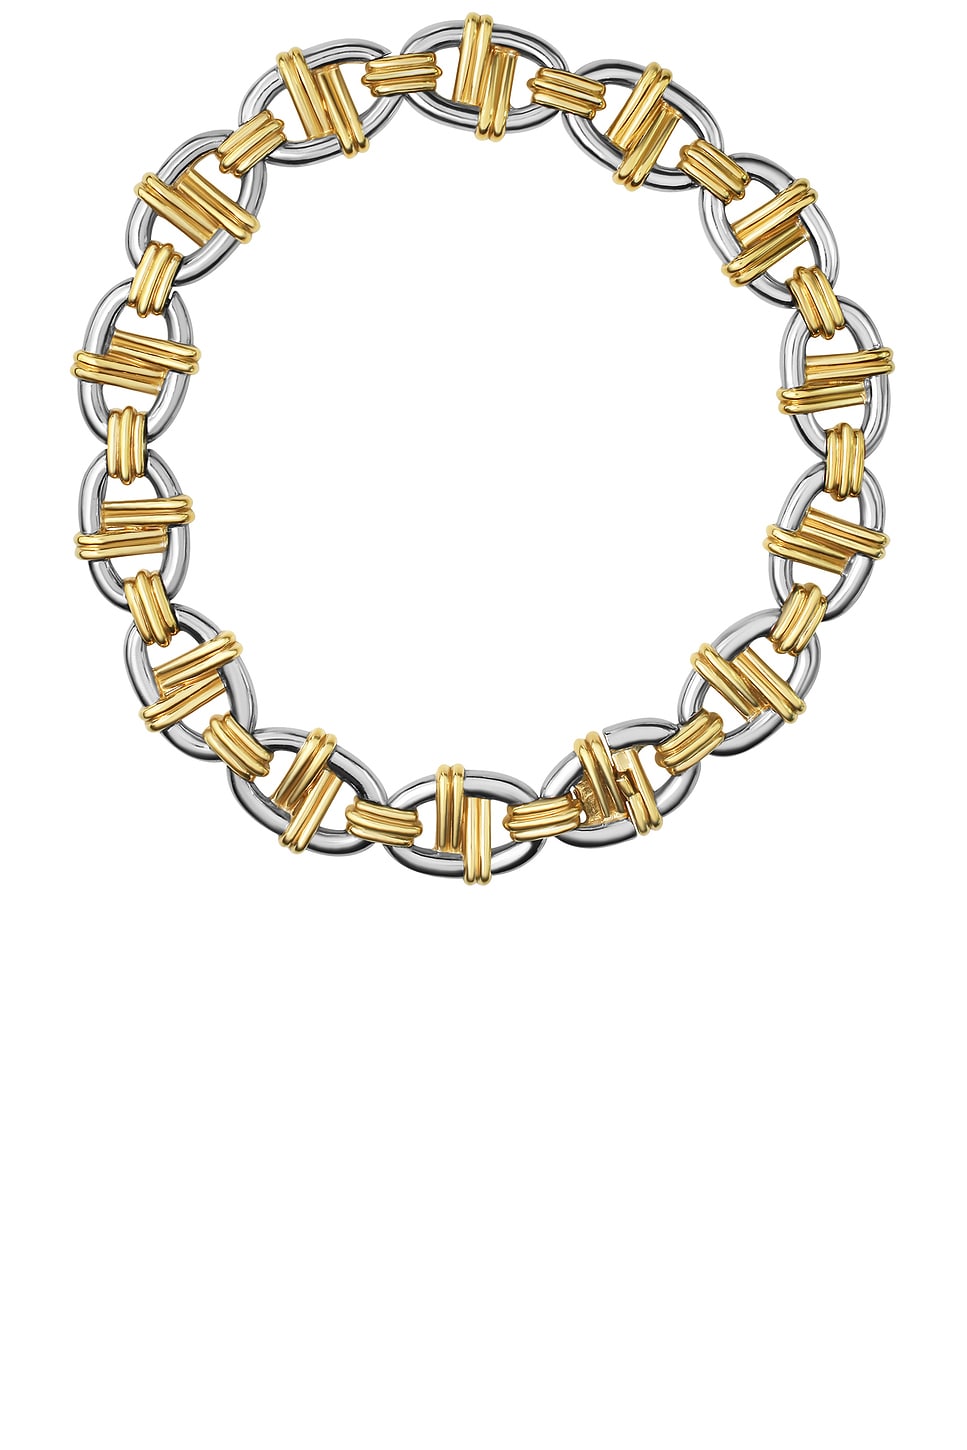 Image 1 of 23CARAT Vintage Ciner Chaine D'ancre Necklace in Gold Tone